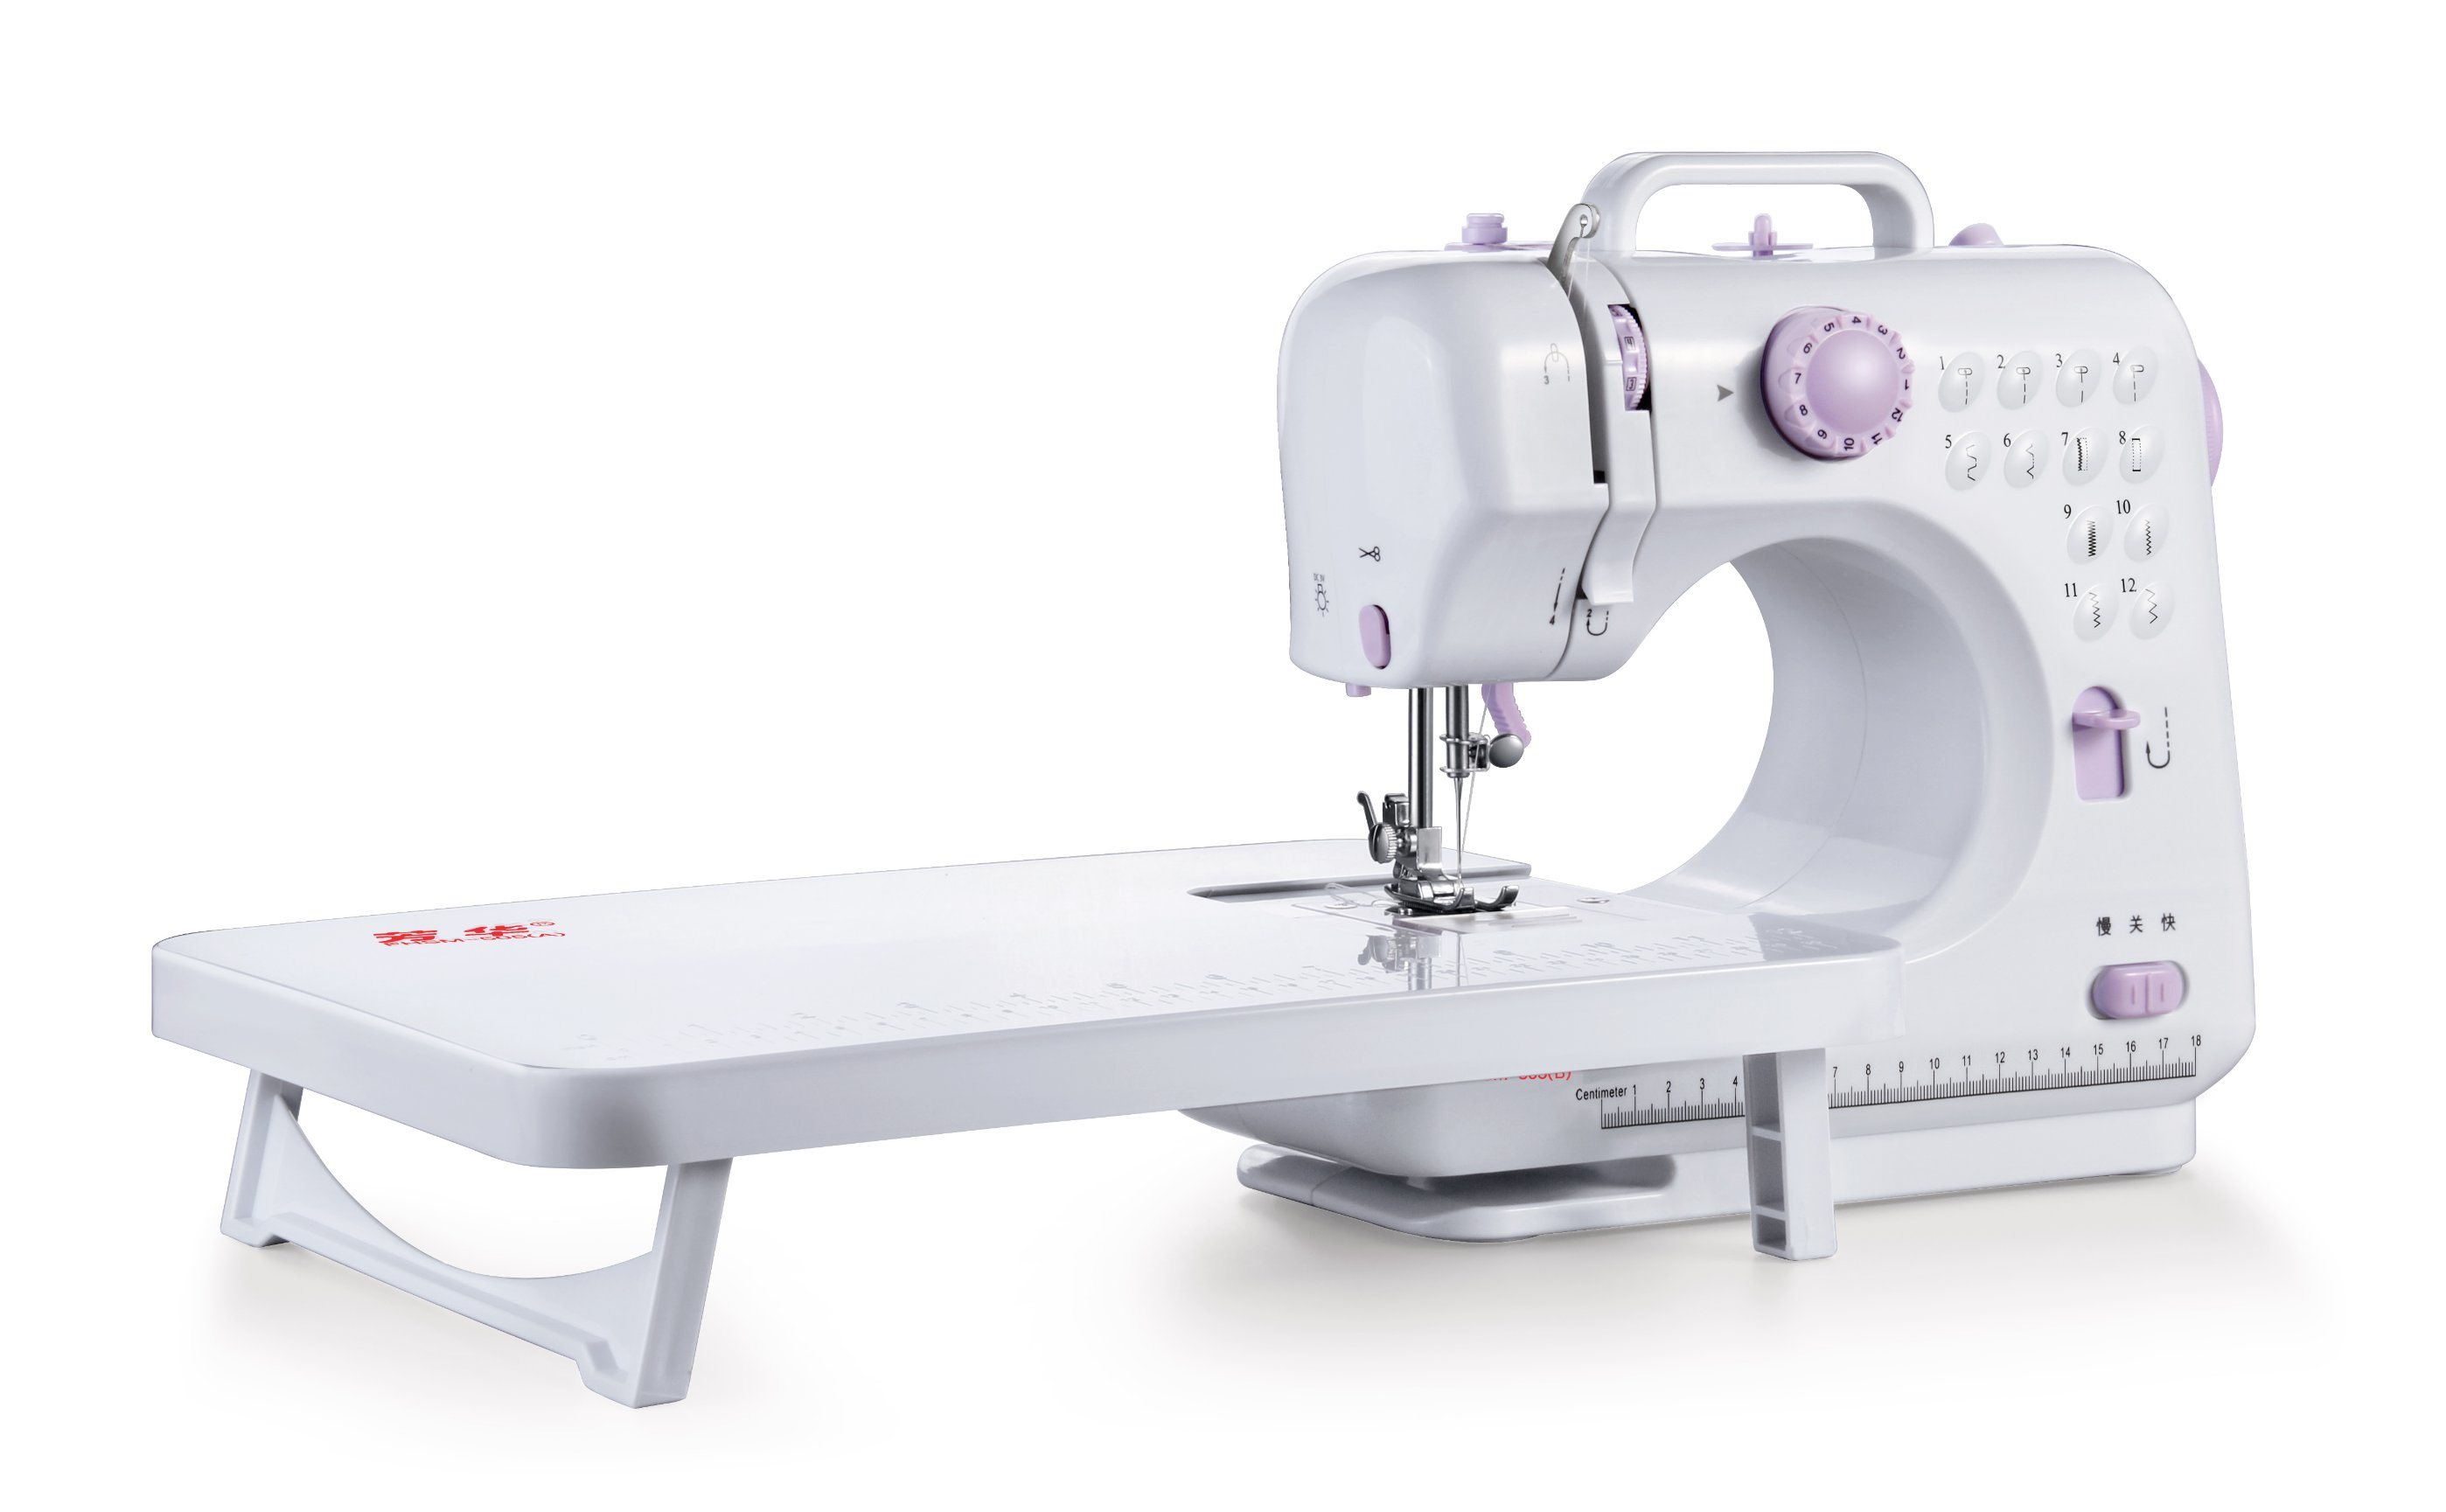 Fhsm-505 Sewing Machine with LED Light Electric Household Sewing Machine, High Quality Used Sewing Machines, Mini Electric Sewing Machine Manual, Typical Sewin